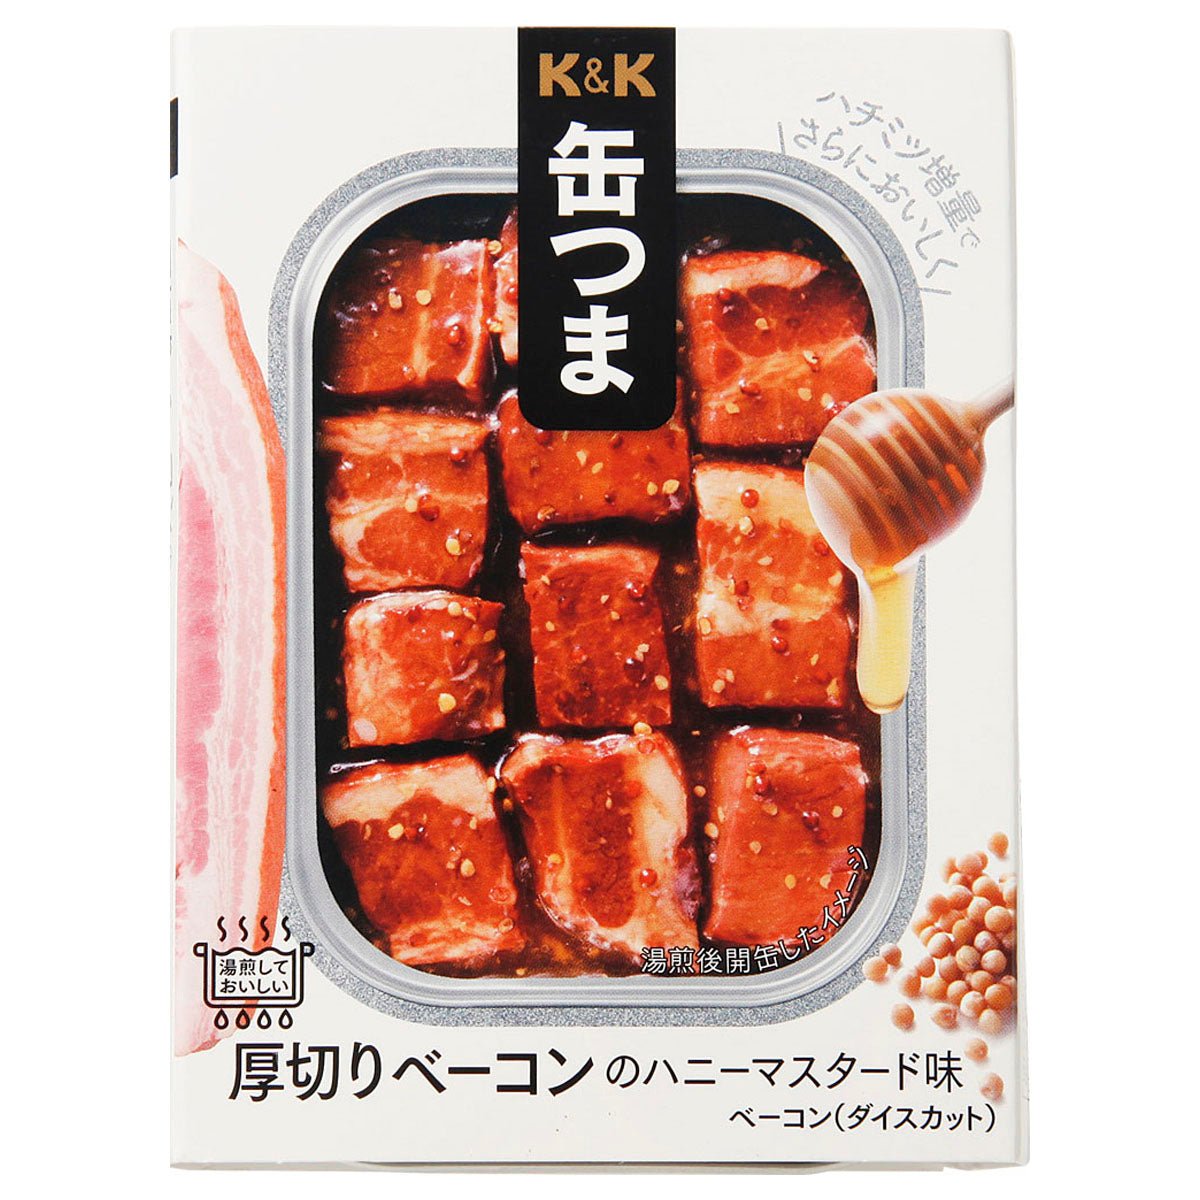 K & K cans thick sliced ​​bacon honey mustard flavor